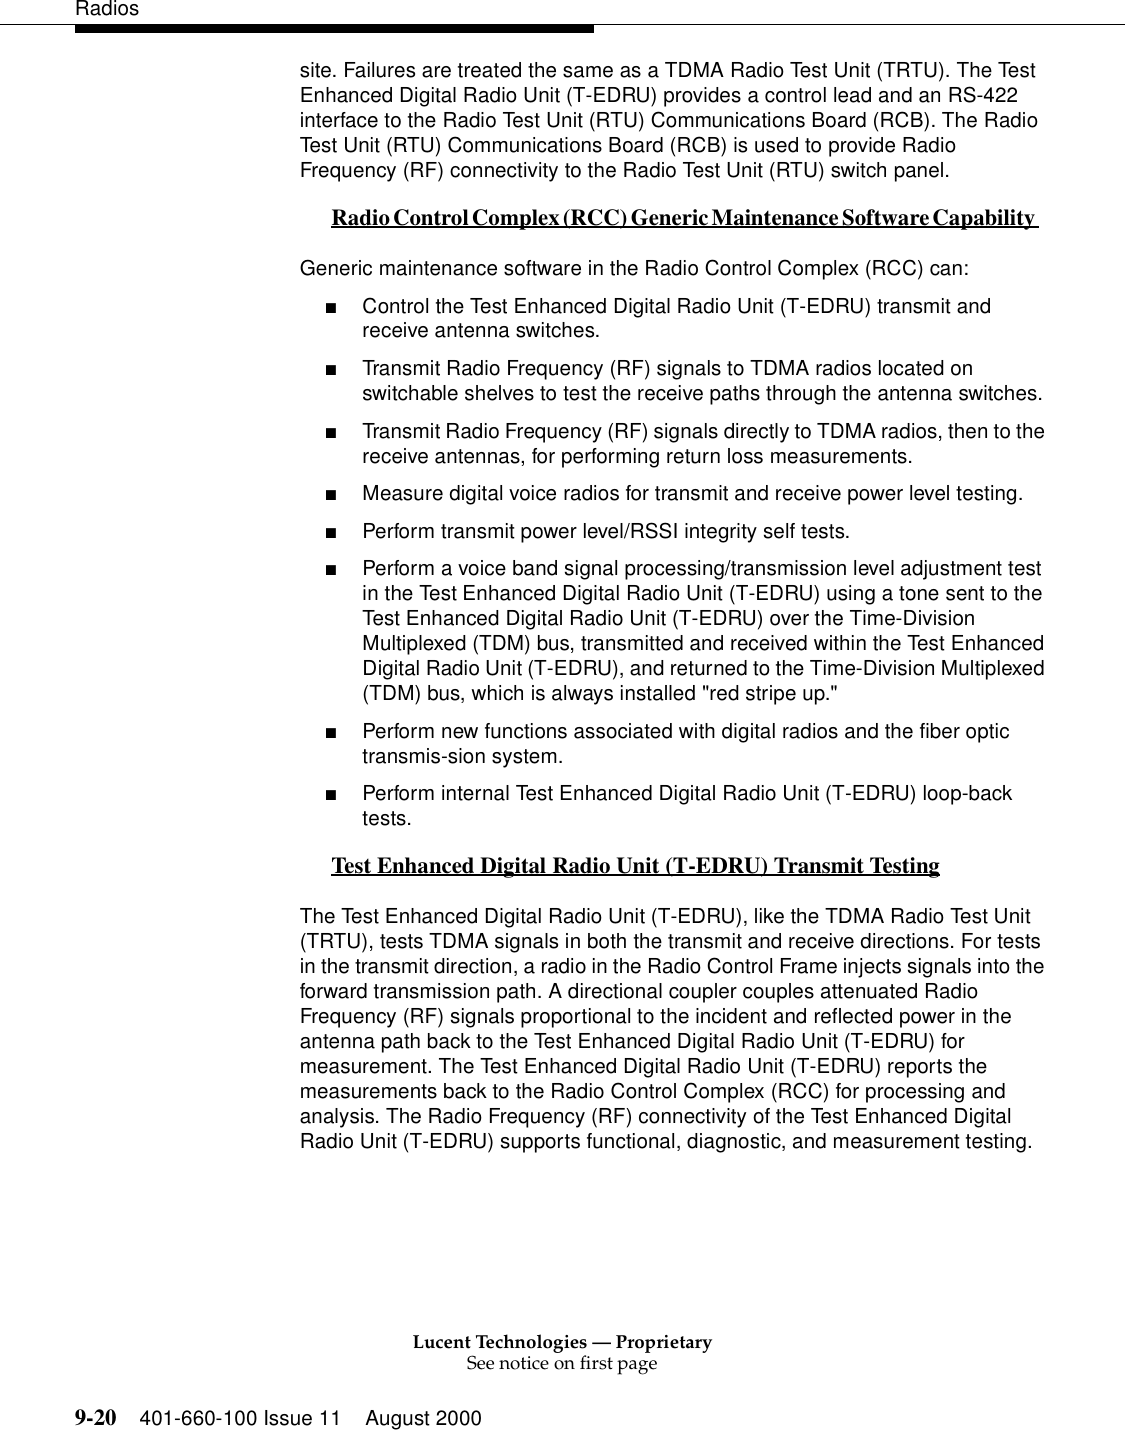 Lucent Technologies — ProprietarySee notice on first page9-20 401-660-100 Issue 11 August 2000Radiossite. Failures are treated the same as a TDMA Radio Test Unit (TRTU). The Test Enhanced Digital Radio Unit (T-EDRU) provides a control lead and an RS-422 interface to the Radio Test Unit (RTU) Communications Board (RCB). The Radio Test Unit (RTU) Communications Board (RCB) is used to provide Radio Frequency (RF) connectivity to the Radio Test Unit (RTU) switch panel. Radio Control Complex (RCC) Generic Maintenance Software Capability 0Generic maintenance software in the Radio Control Complex (RCC) can:  ■Control the Test Enhanced Digital Radio Unit (T-EDRU) transmit and receive antenna switches. ■Transmit Radio Frequency (RF) signals to TDMA radios located on switchable shelves to test the receive paths through the antenna switches. ■Transmit Radio Frequency (RF) signals directly to TDMA radios, then to the receive antennas, for performing return loss measurements. ■Measure digital voice radios for transmit and receive power level testing. ■Perform transmit power level/RSSI integrity self tests. ■Perform a voice band signal processing/transmission level adjustment test in the Test Enhanced Digital Radio Unit (T-EDRU) using a tone sent to the Test Enhanced Digital Radio Unit (T-EDRU) over the Time-Division Multiplexed (TDM) bus, transmitted and received within the Test Enhanced Digital Radio Unit (T-EDRU), and returned to the Time-Division Multiplexed (TDM) bus, which is always installed &quot;red stripe up.&quot;■Perform new functions associated with digital radios and the fiber optic transmis-sion system. ■Perform internal Test Enhanced Digital Radio Unit (T-EDRU) loop-back tests.  Test Enhanced Digital Radio Unit (T-EDRU) Transmit Testing 0The Test Enhanced Digital Radio Unit (T-EDRU), like the TDMA Radio Test Unit (TRTU), tests TDMA signals in both the transmit and receive directions. For tests in the transmit direction, a radio in the Radio Control Frame injects signals into the forward transmission path. A directional coupler couples attenuated Radio Frequency (RF) signals proportional to the incident and reflected power in the antenna path back to the Test Enhanced Digital Radio Unit (T-EDRU) for measurement. The Test Enhanced Digital Radio Unit (T-EDRU) reports the measurements back to the Radio Control Complex (RCC) for processing and analysis. The Radio Frequency (RF) connectivity of the Test Enhanced Digital Radio Unit (T-EDRU) supports functional, diagnostic, and measurement testing. 